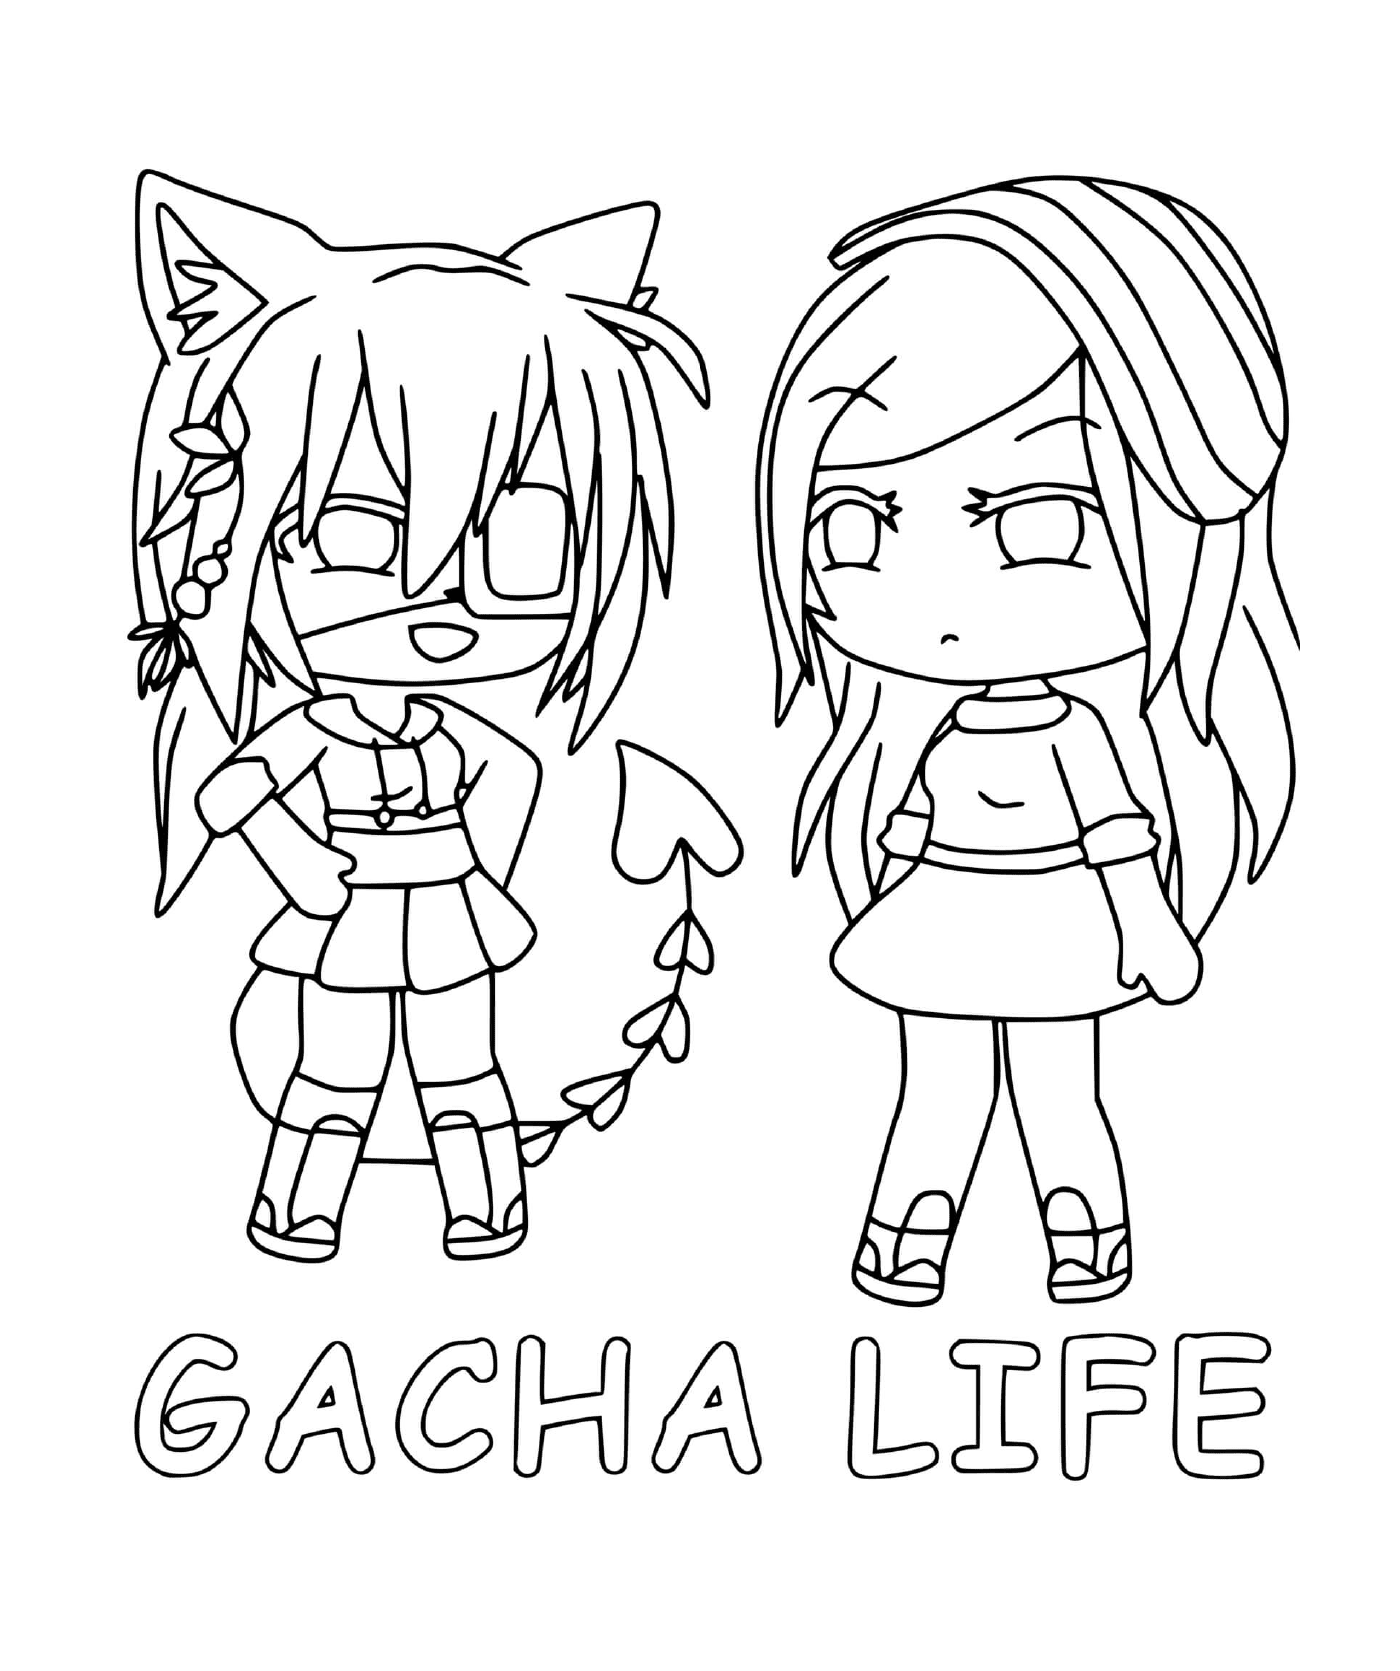  Two friends in Gacha Life 